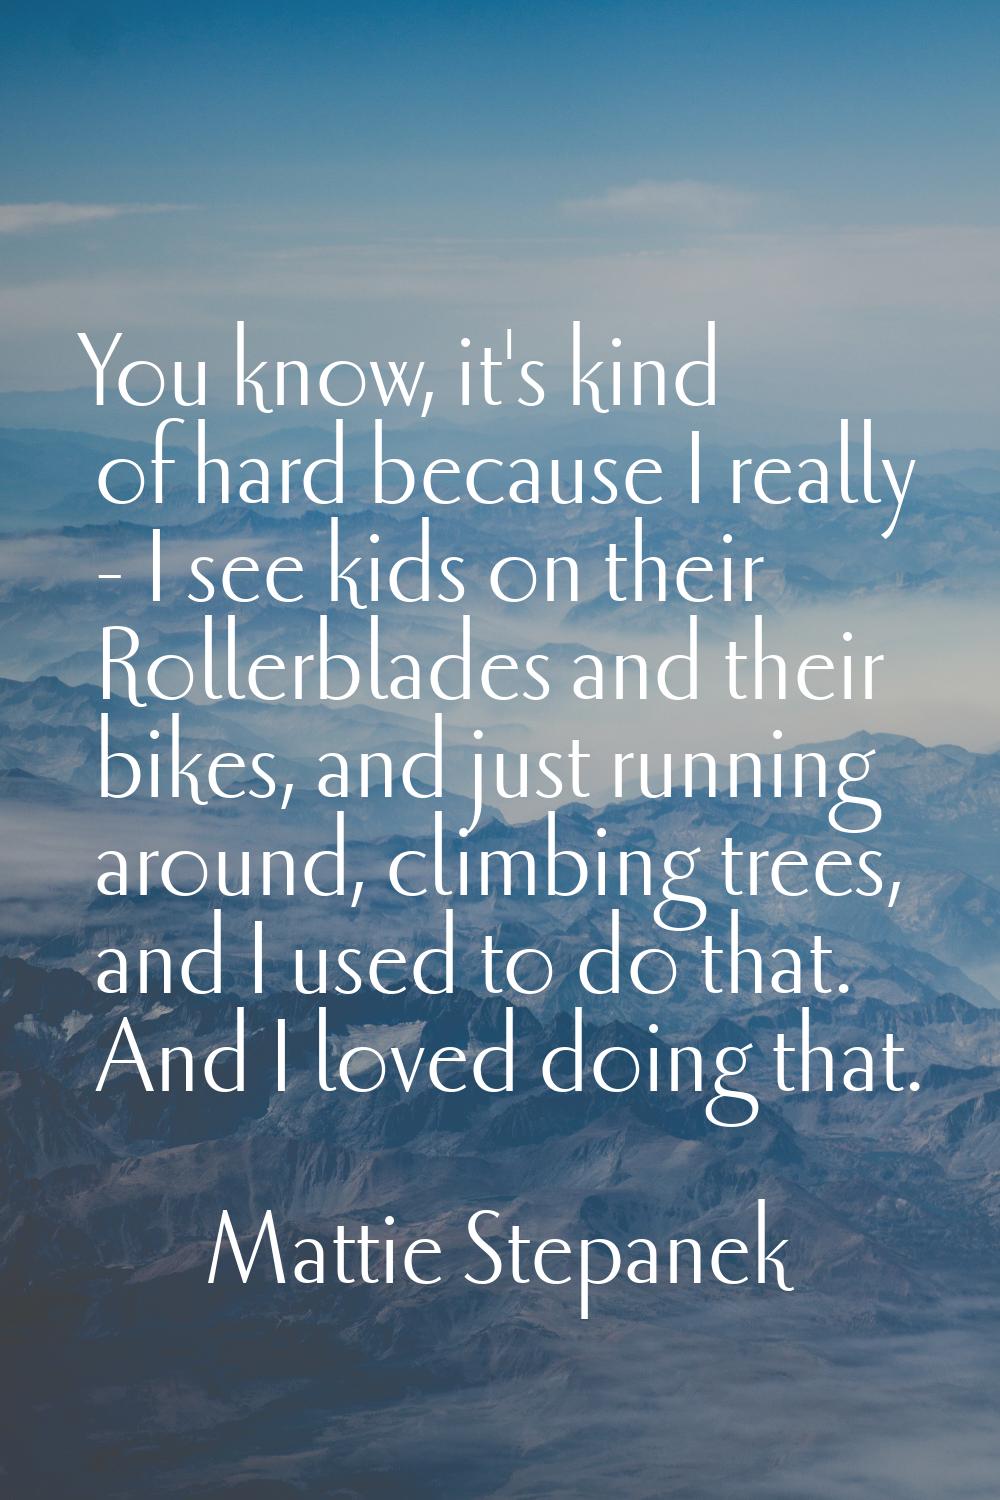 You know, it's kind of hard because I really - I see kids on their Rollerblades and their bikes, an